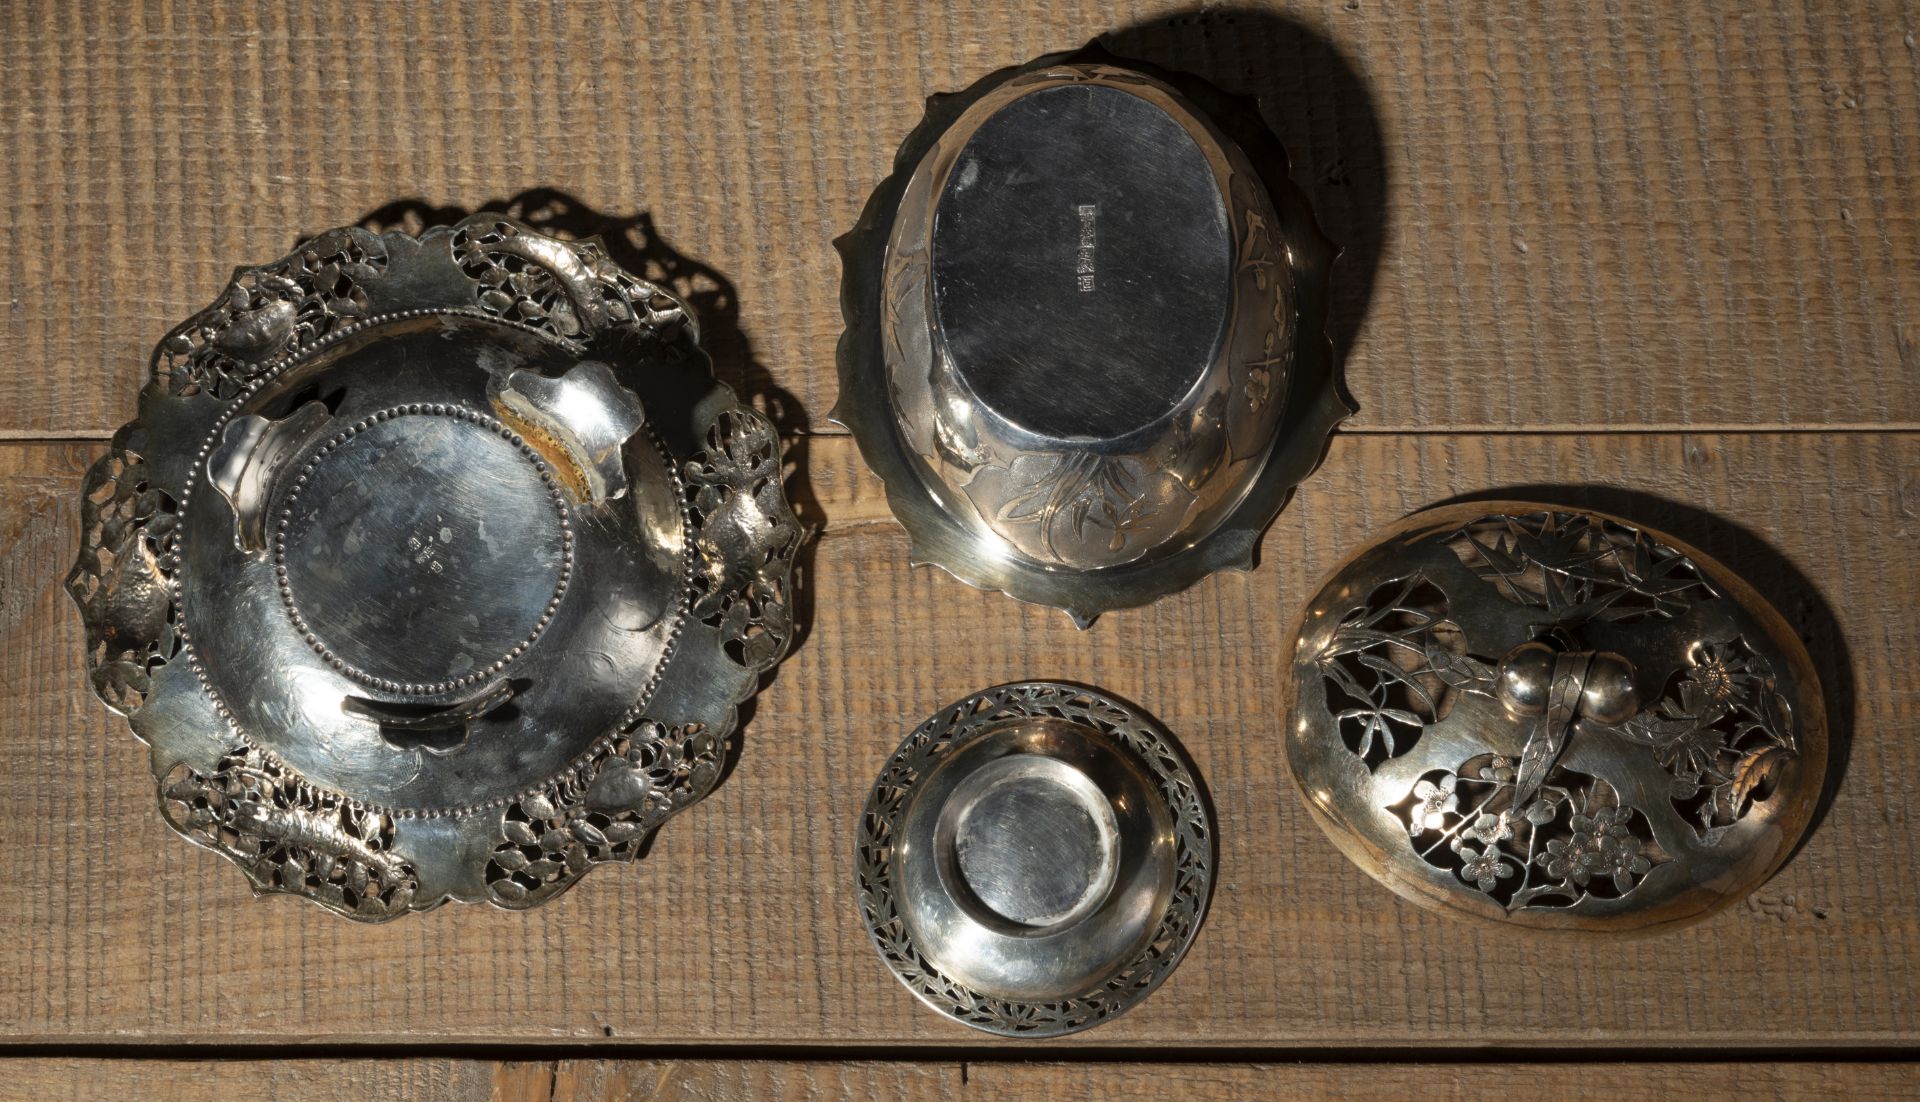 A SILVER COVERED BOWL, A BOWL WITH HANDLE AND A SMALL BOWL WITH FLORAL DECORATION, PARTLY IN OPENWO - Image 4 of 4